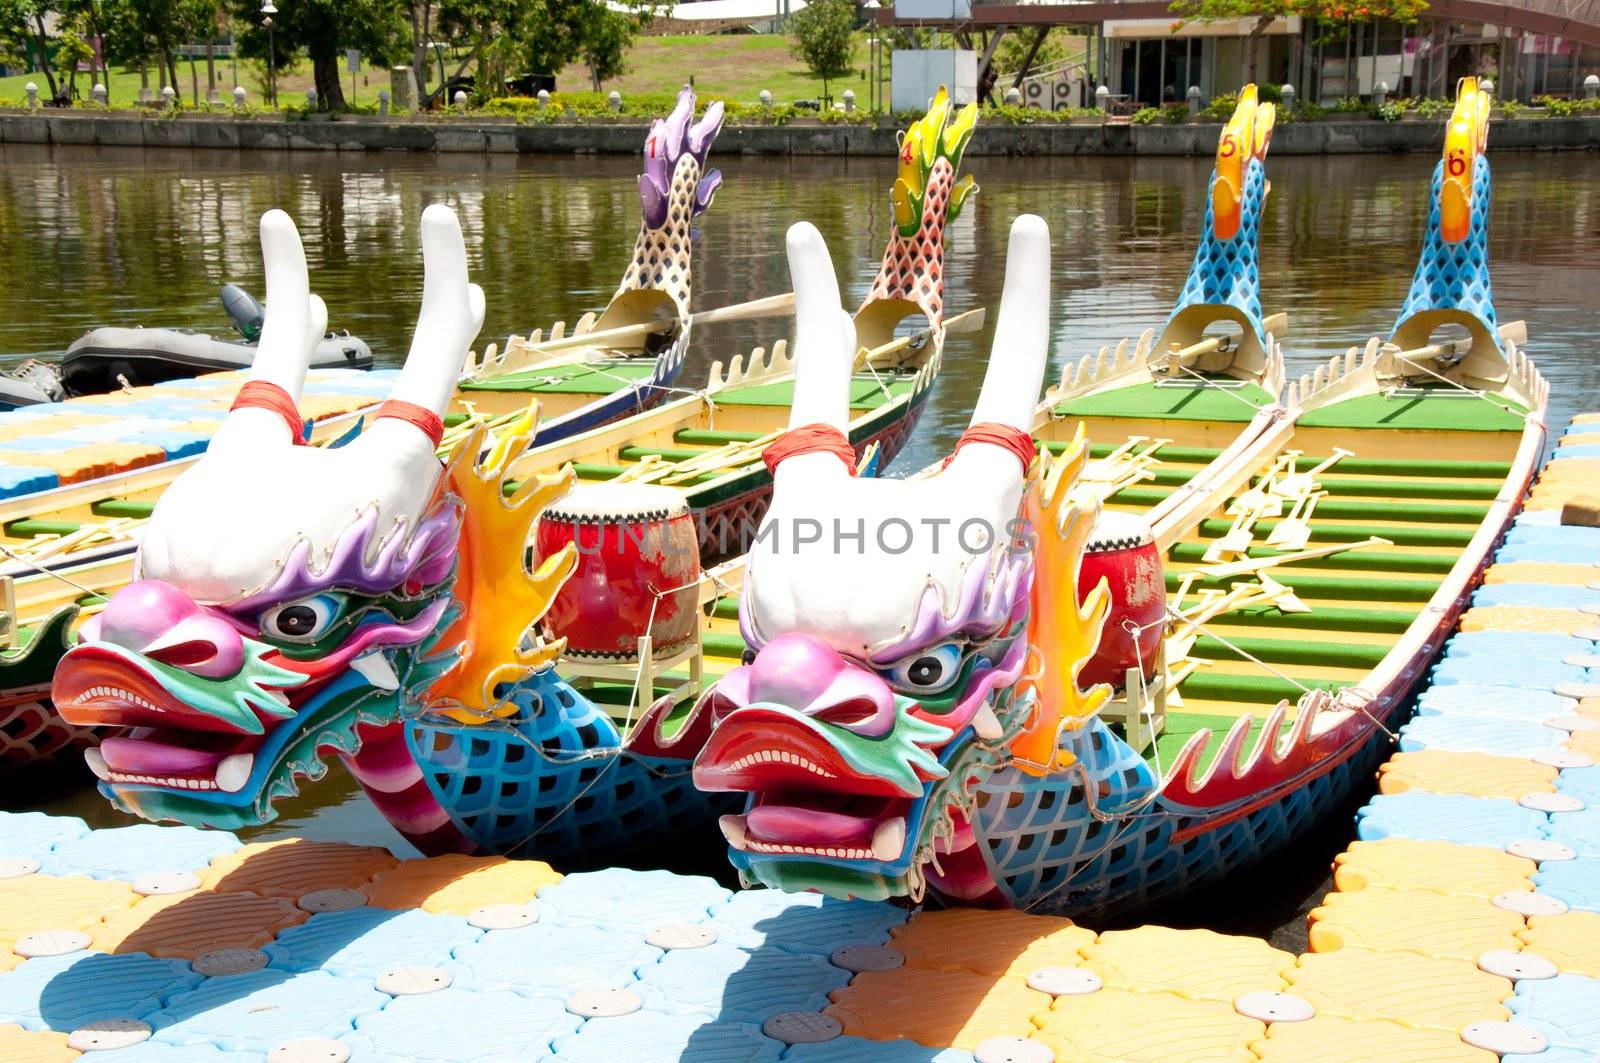 Waiting for the Dragon Boat race in Asia